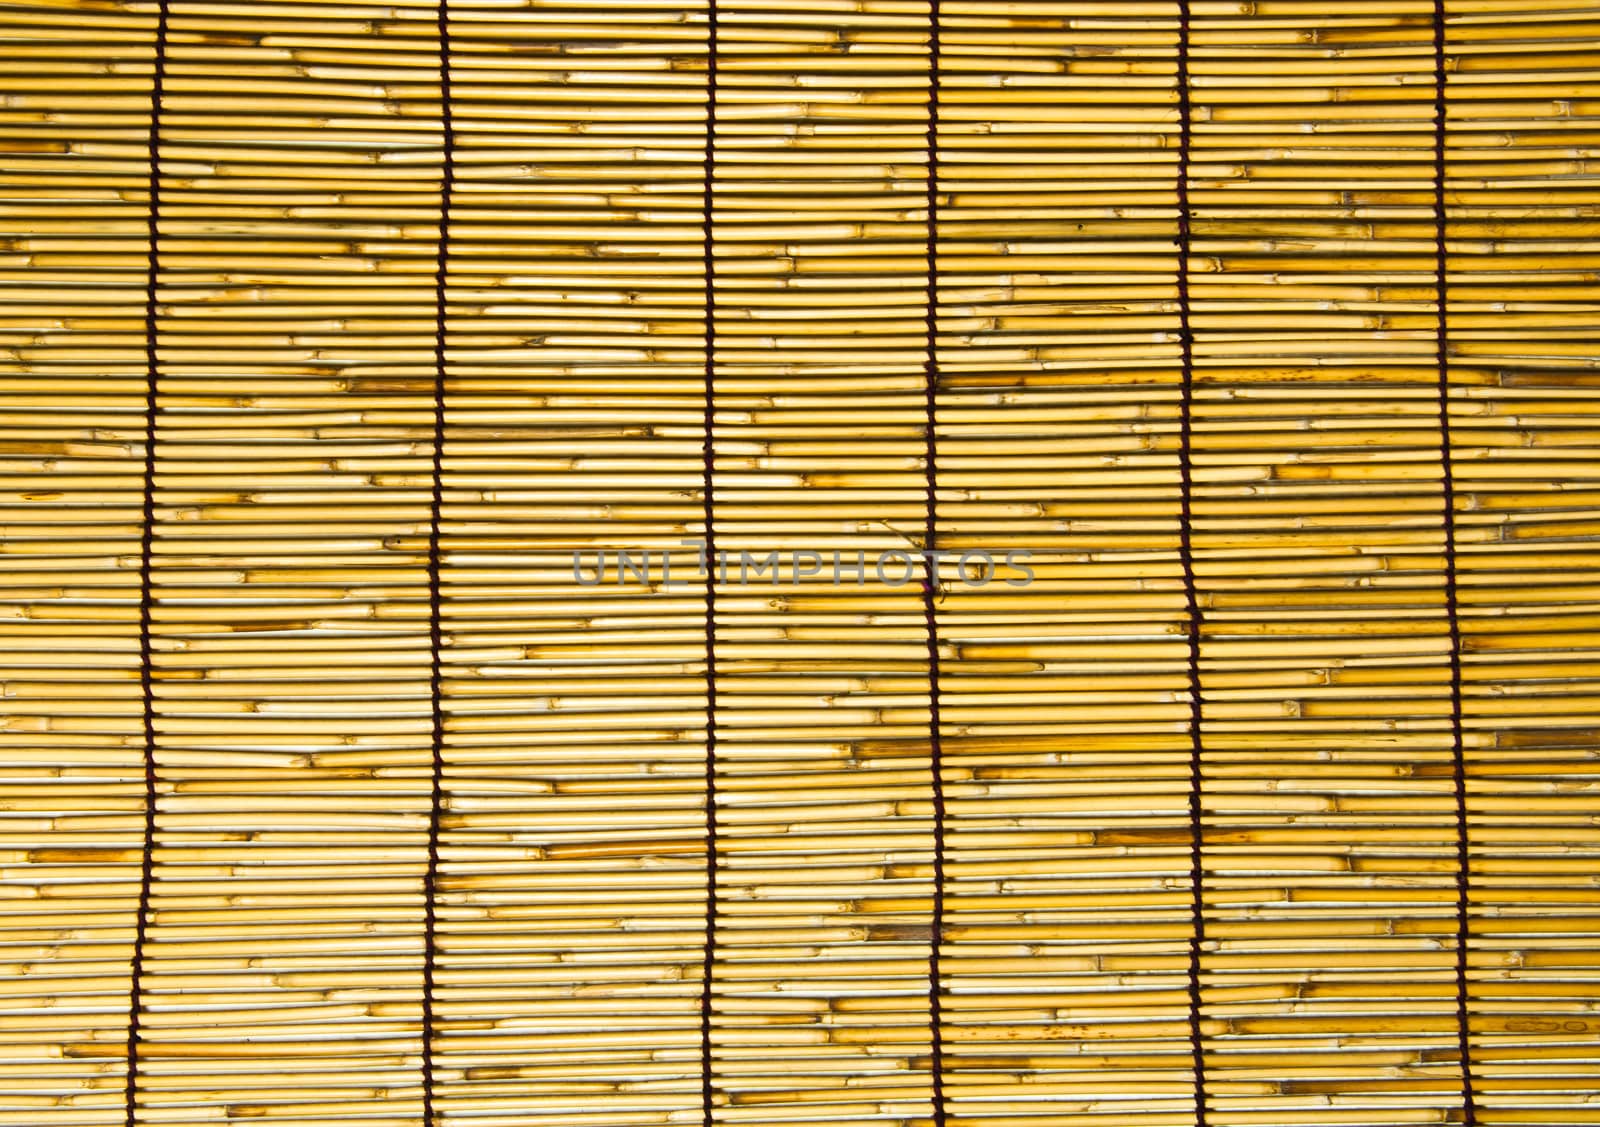 This is a wall of bamboo are woven together in a large sheet.